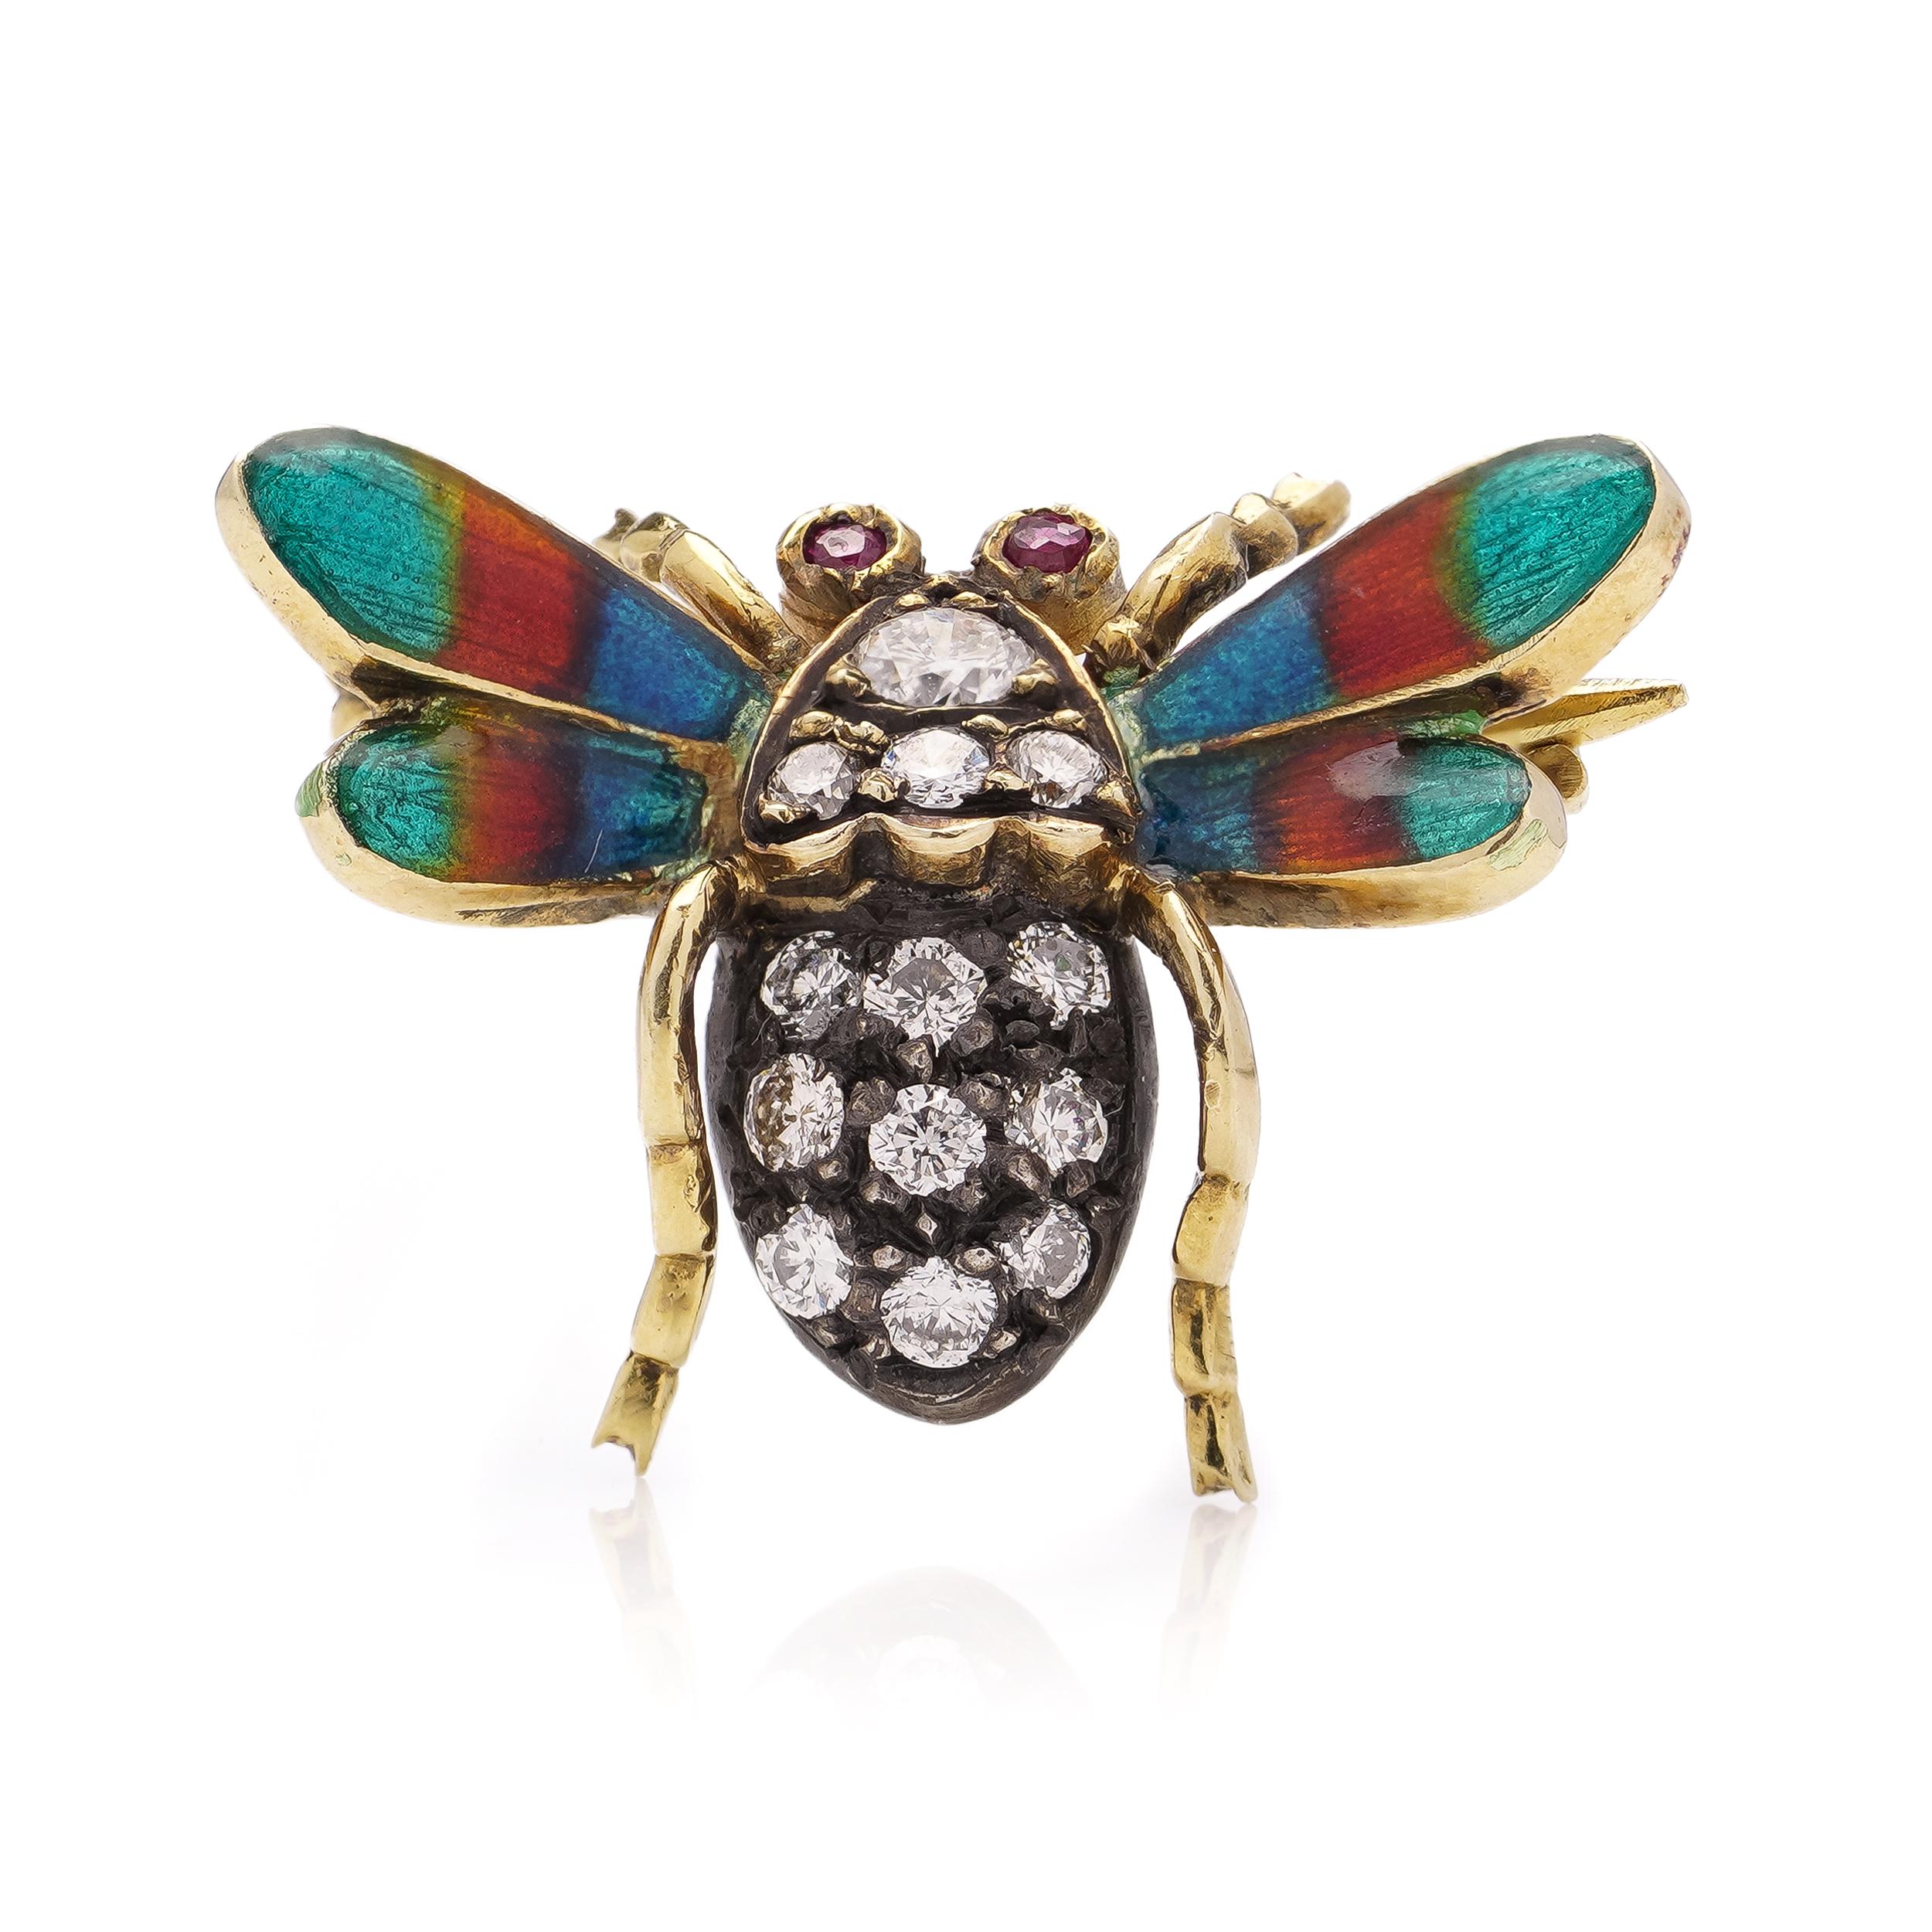  Edwardian 18kt. yellow gold and silver open-winged insect brooch In Good Condition For Sale In Braintree, GB